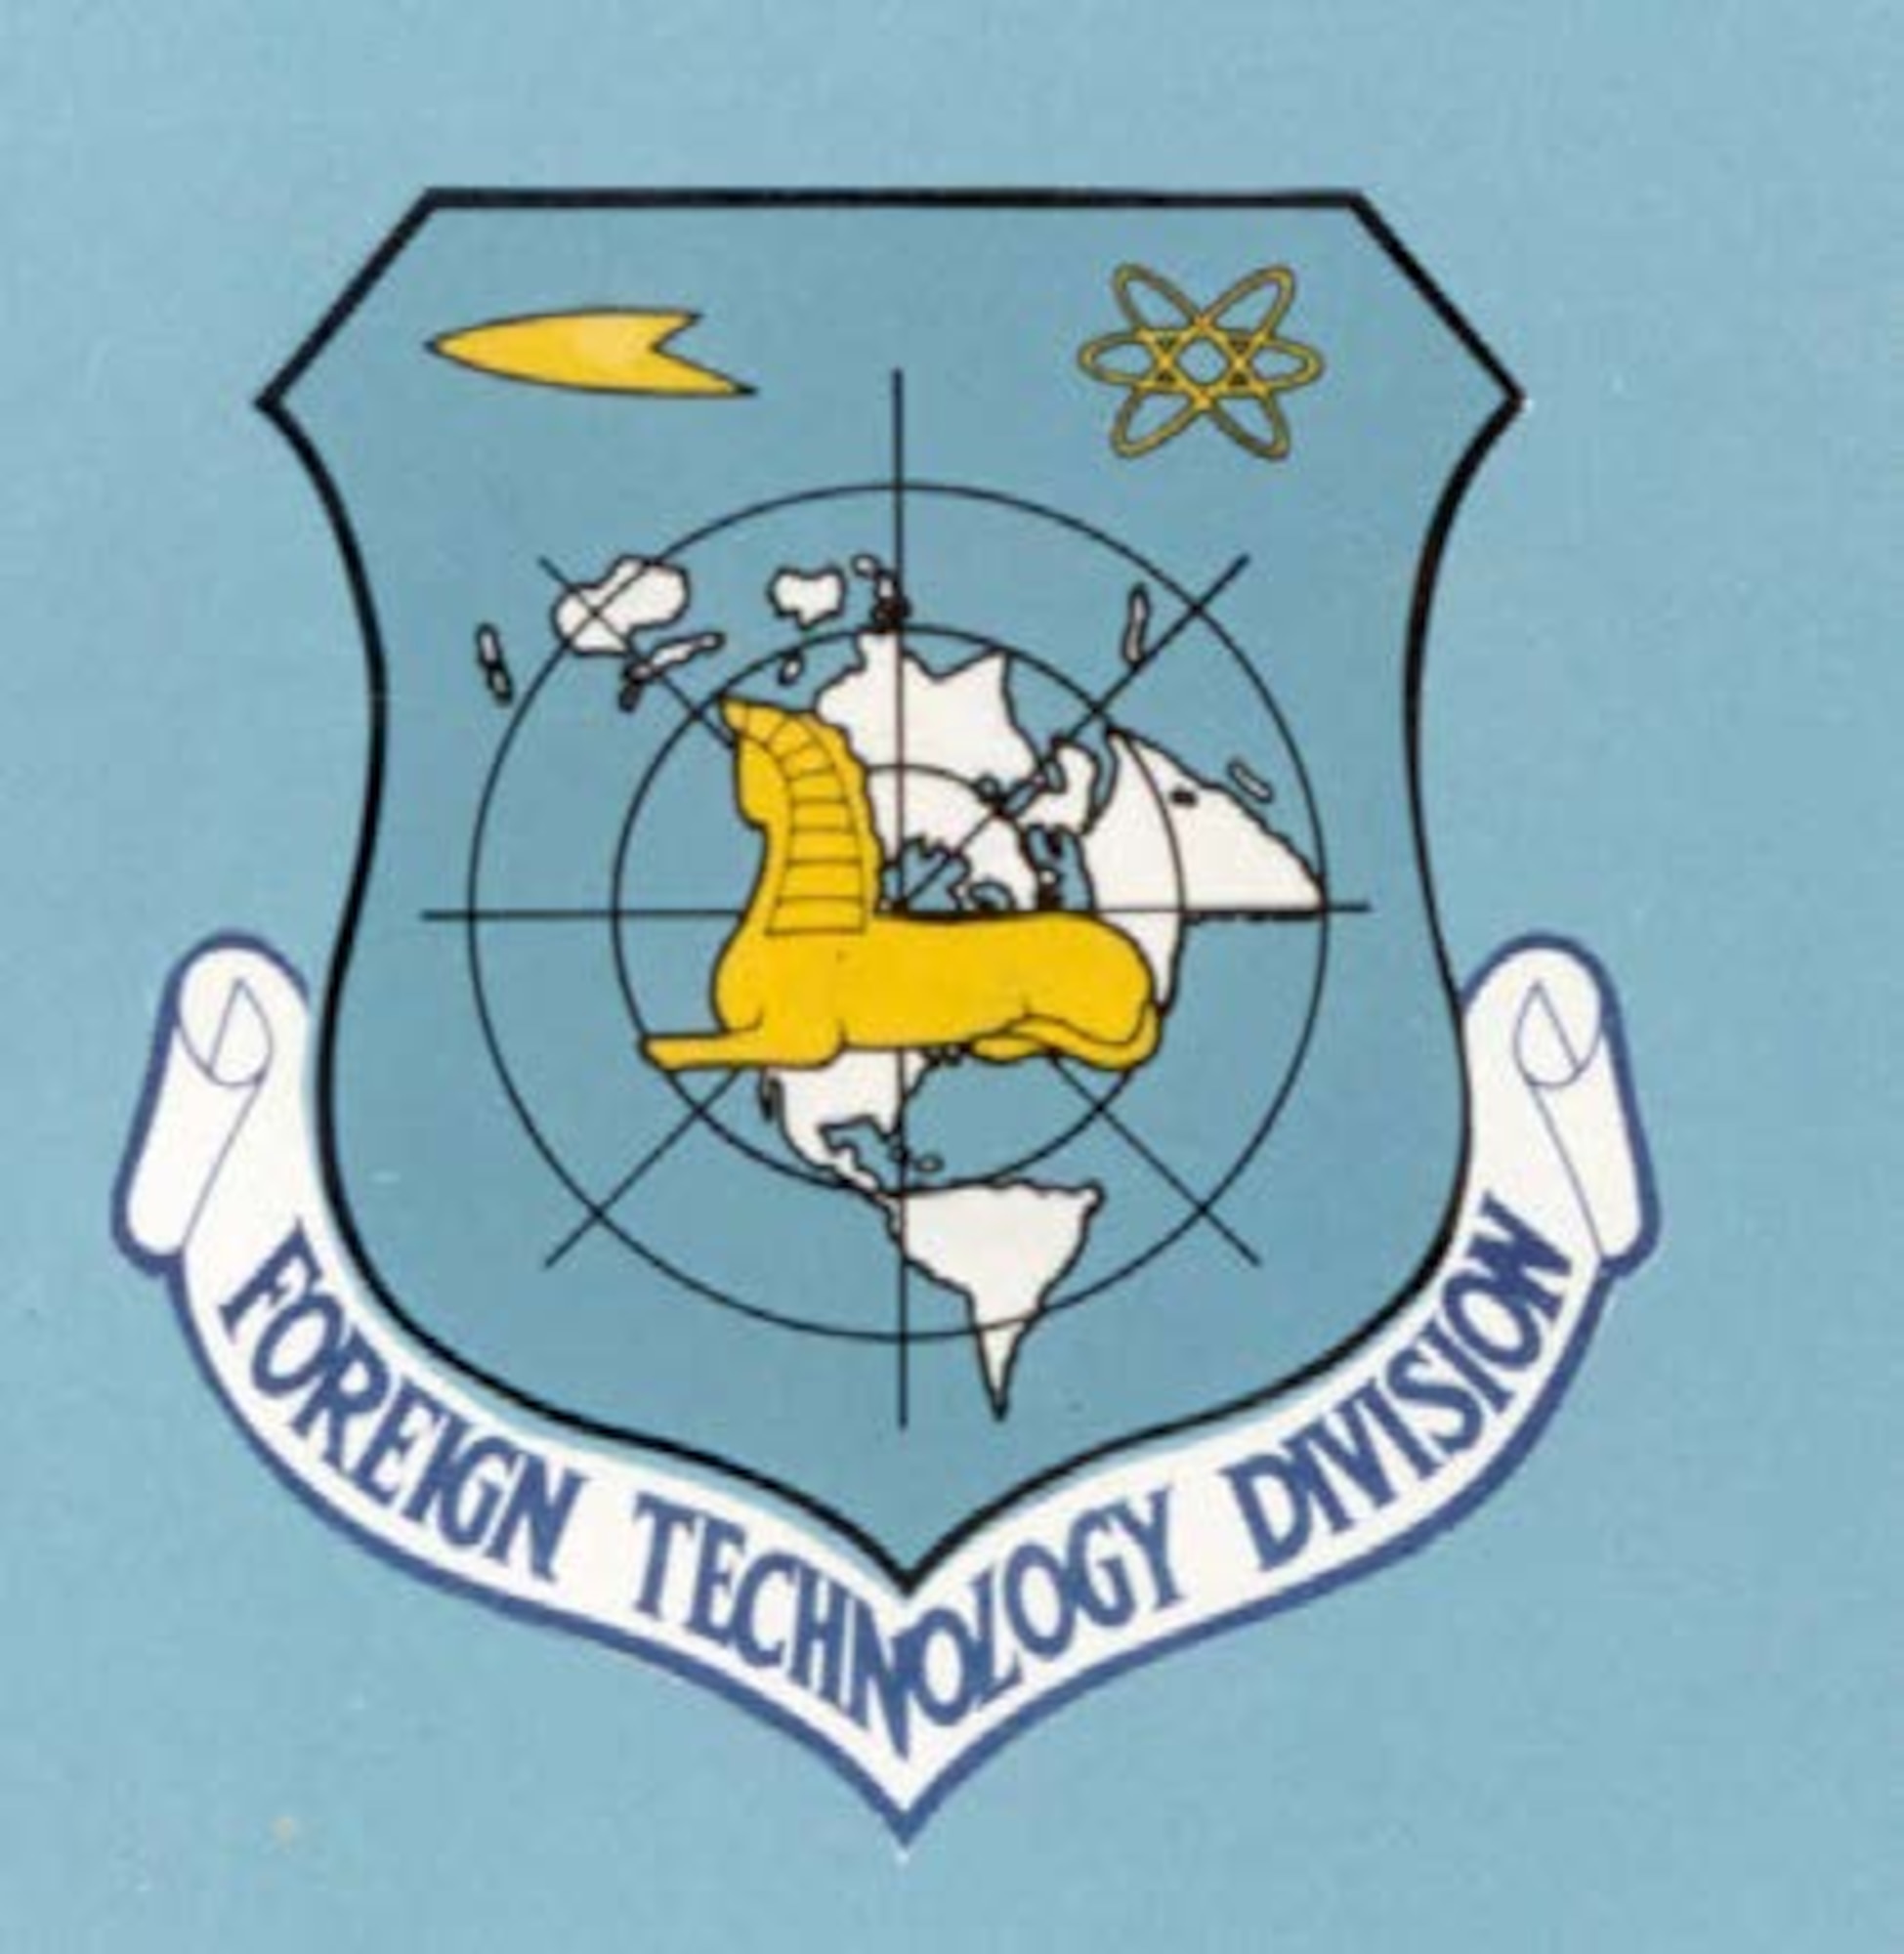 The Foreign Technology Division was the official iteration of what would eventually become the National Air and Space Intelligence Center